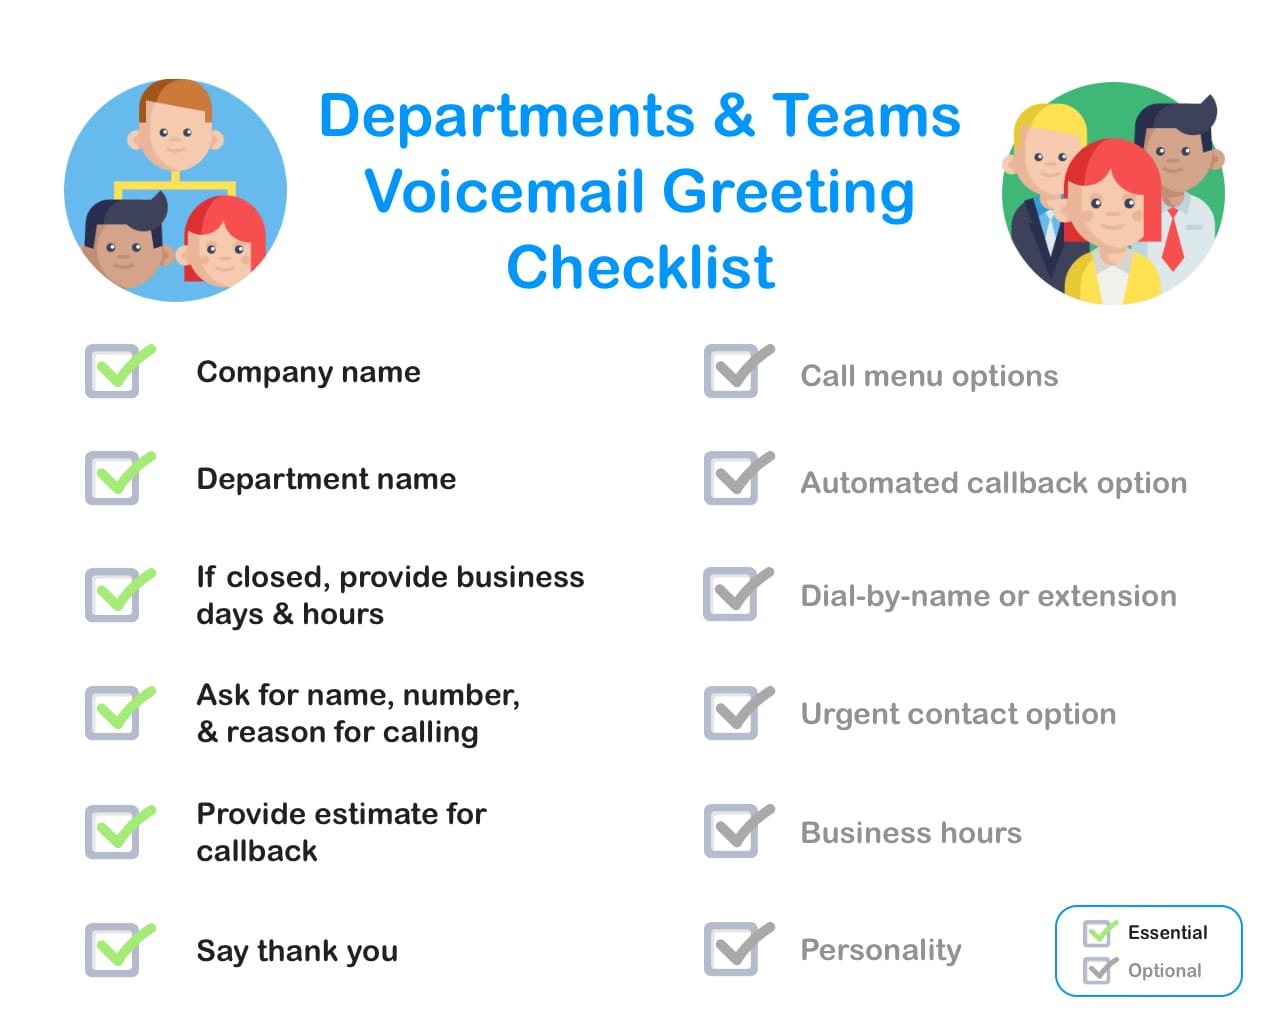 Professional voicemail greeting checklist